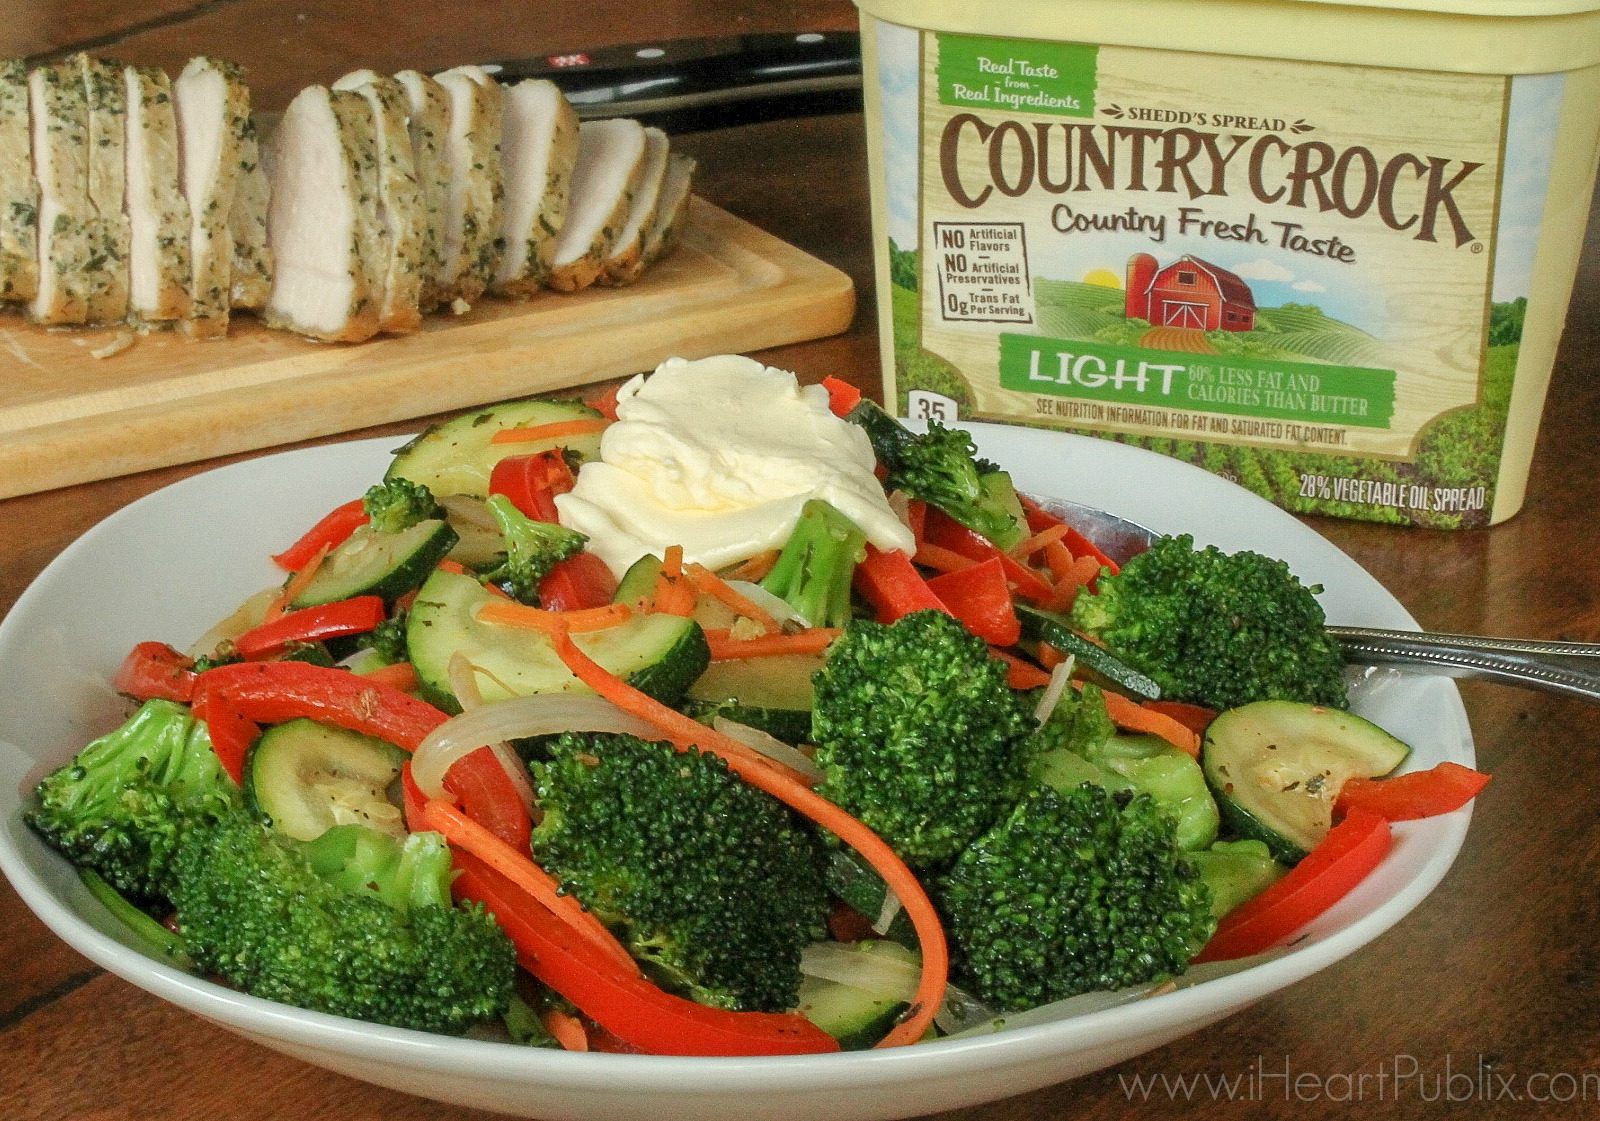 Simply Sautéed Vegetables – Serve Up Great Taste And Save $2 On Country Crock At Publix